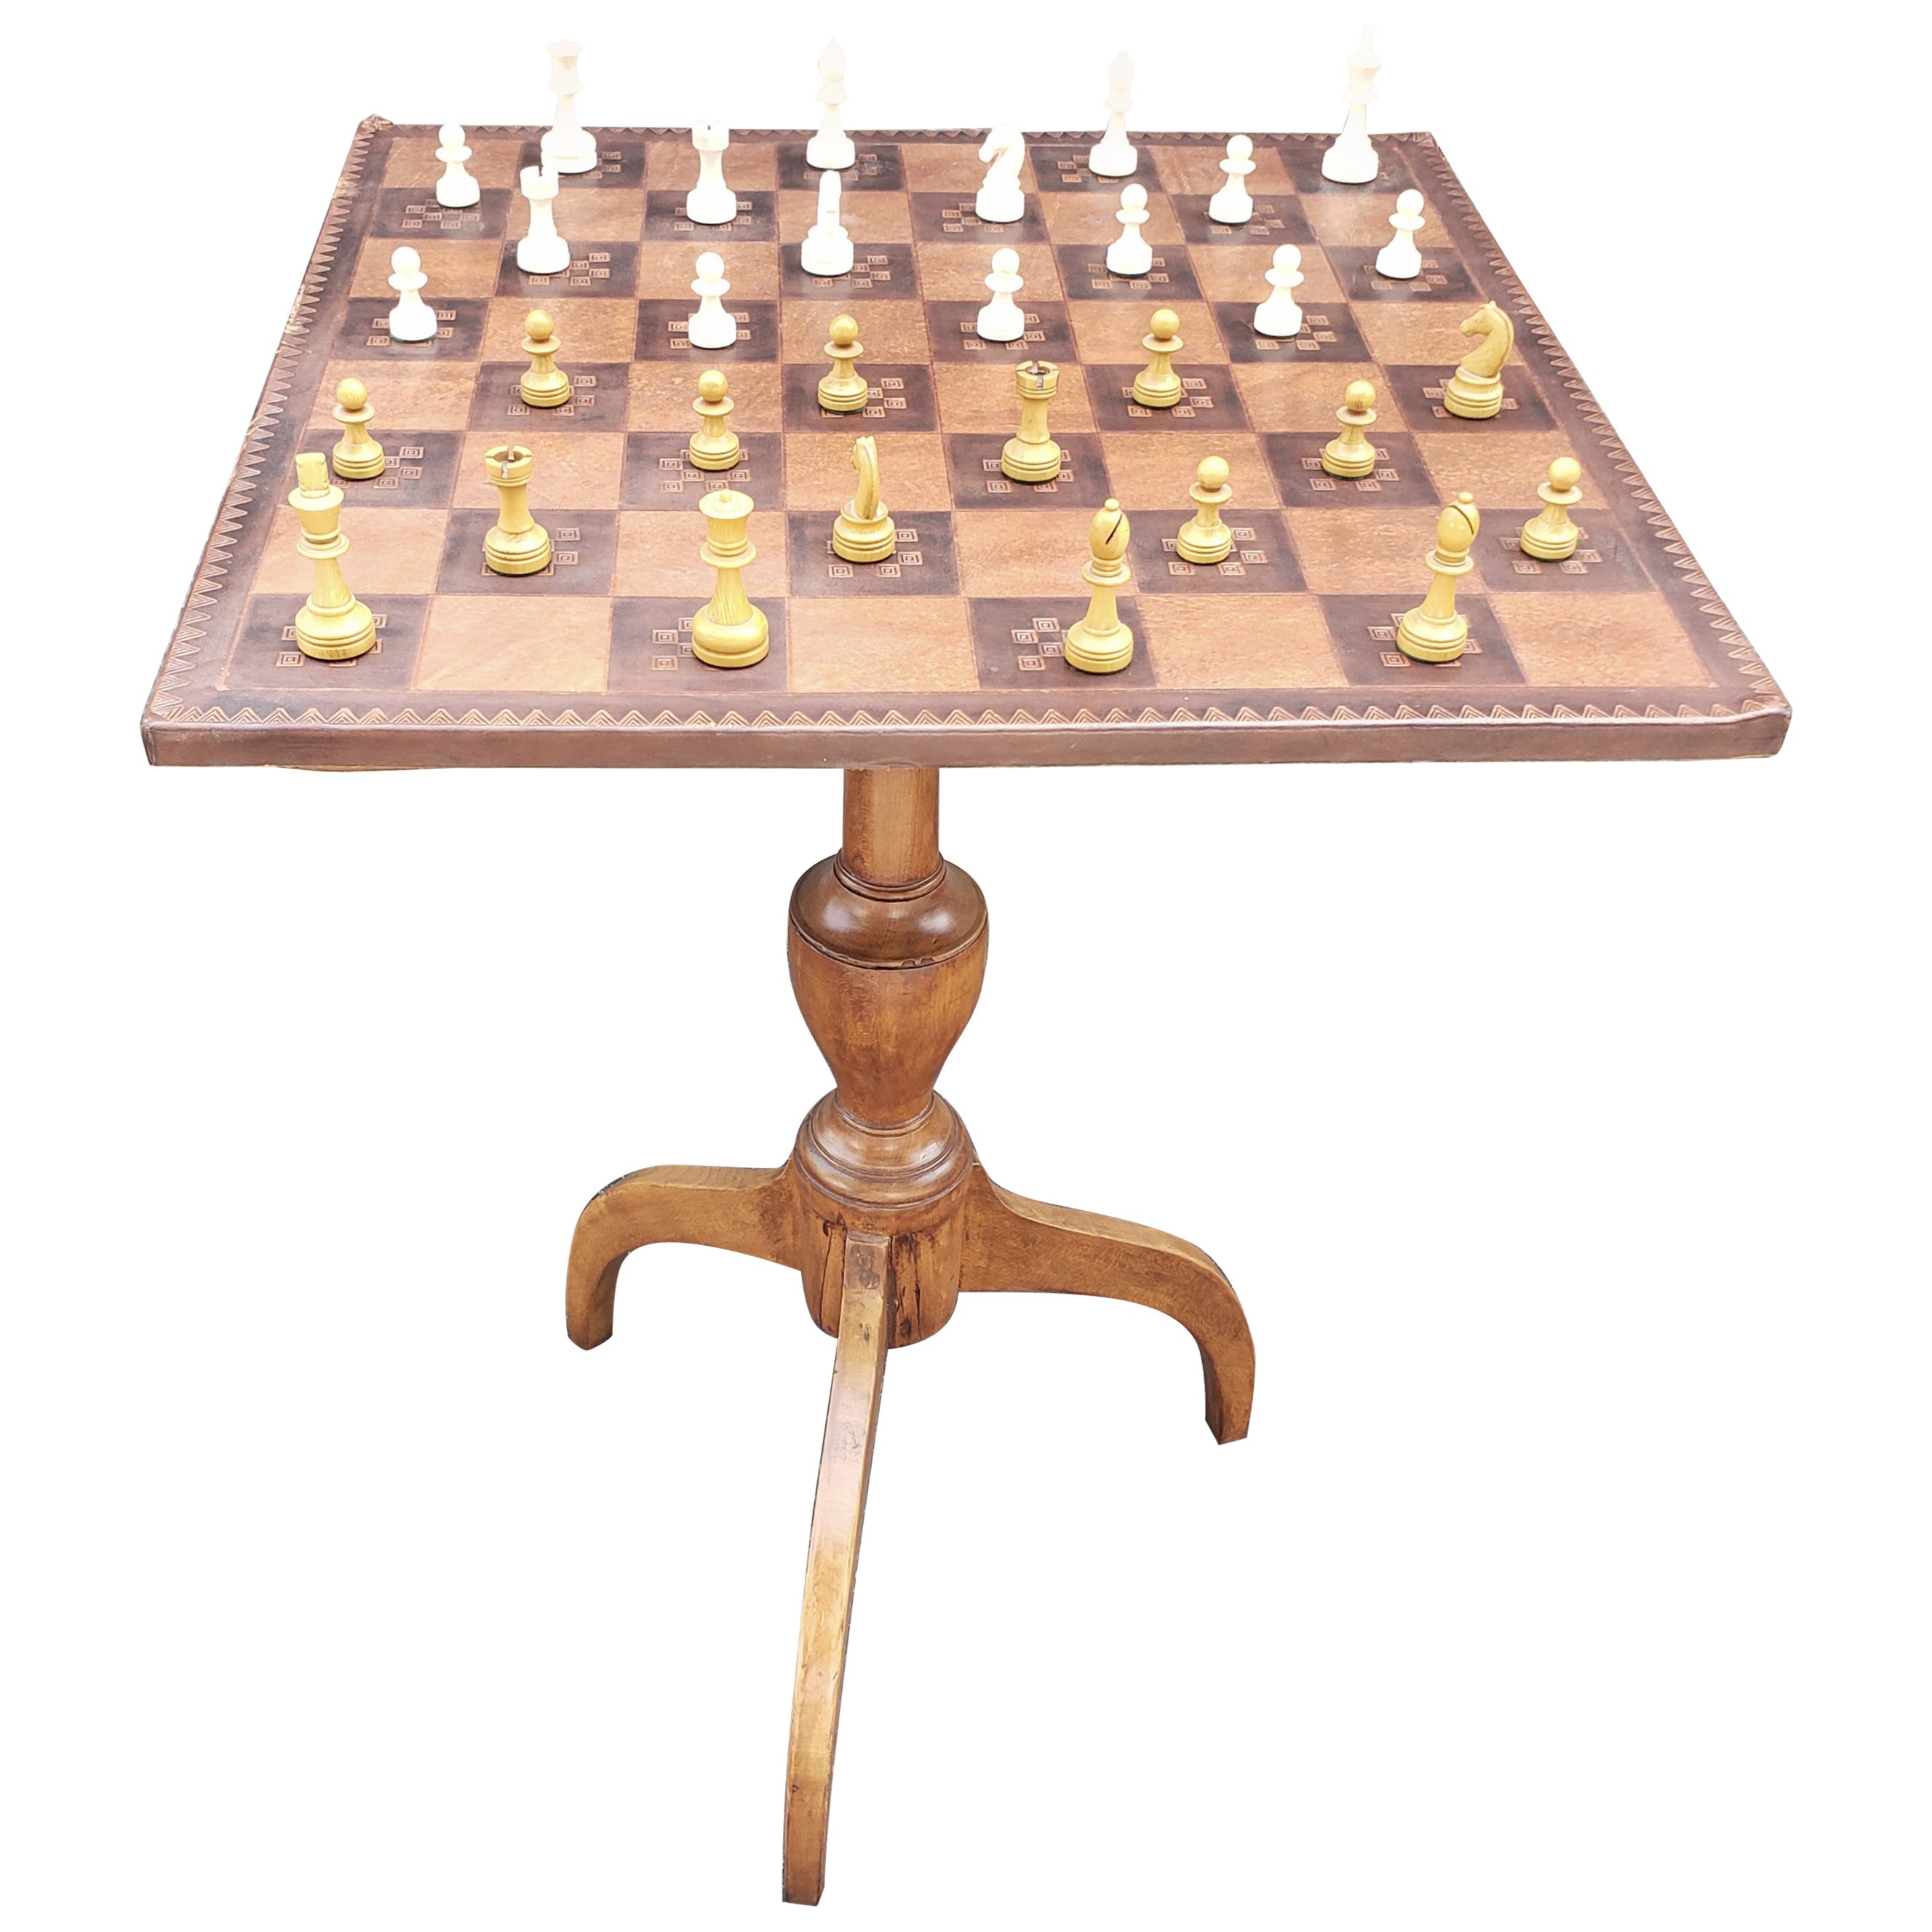 19th Century Spider Legs Maple Table & Leather Top Chess Board and Pieces Set For Sale